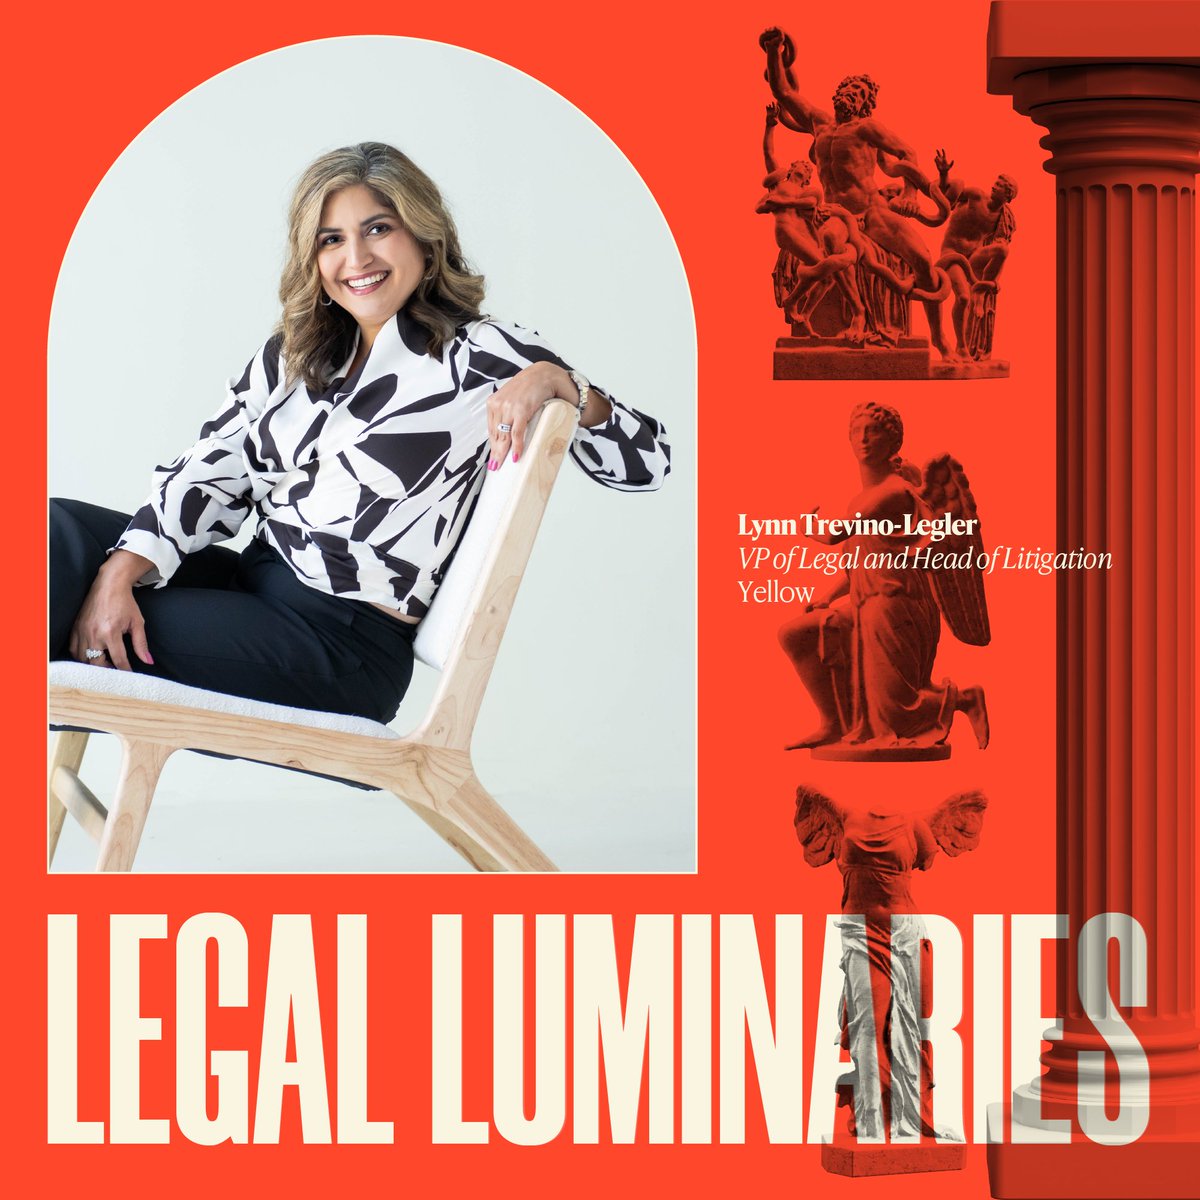 LEGAL LUMINARIES ⚖️💼: Lynn Trevino-Legler took a nontraditional approach to shaping her career. Now, she’s the VP of legal and head of litigation for one of the largest trucking companies in the nation, Yellow. hubs.la/Q02wBh320 #HispanicExecMag #LegalLuminaries